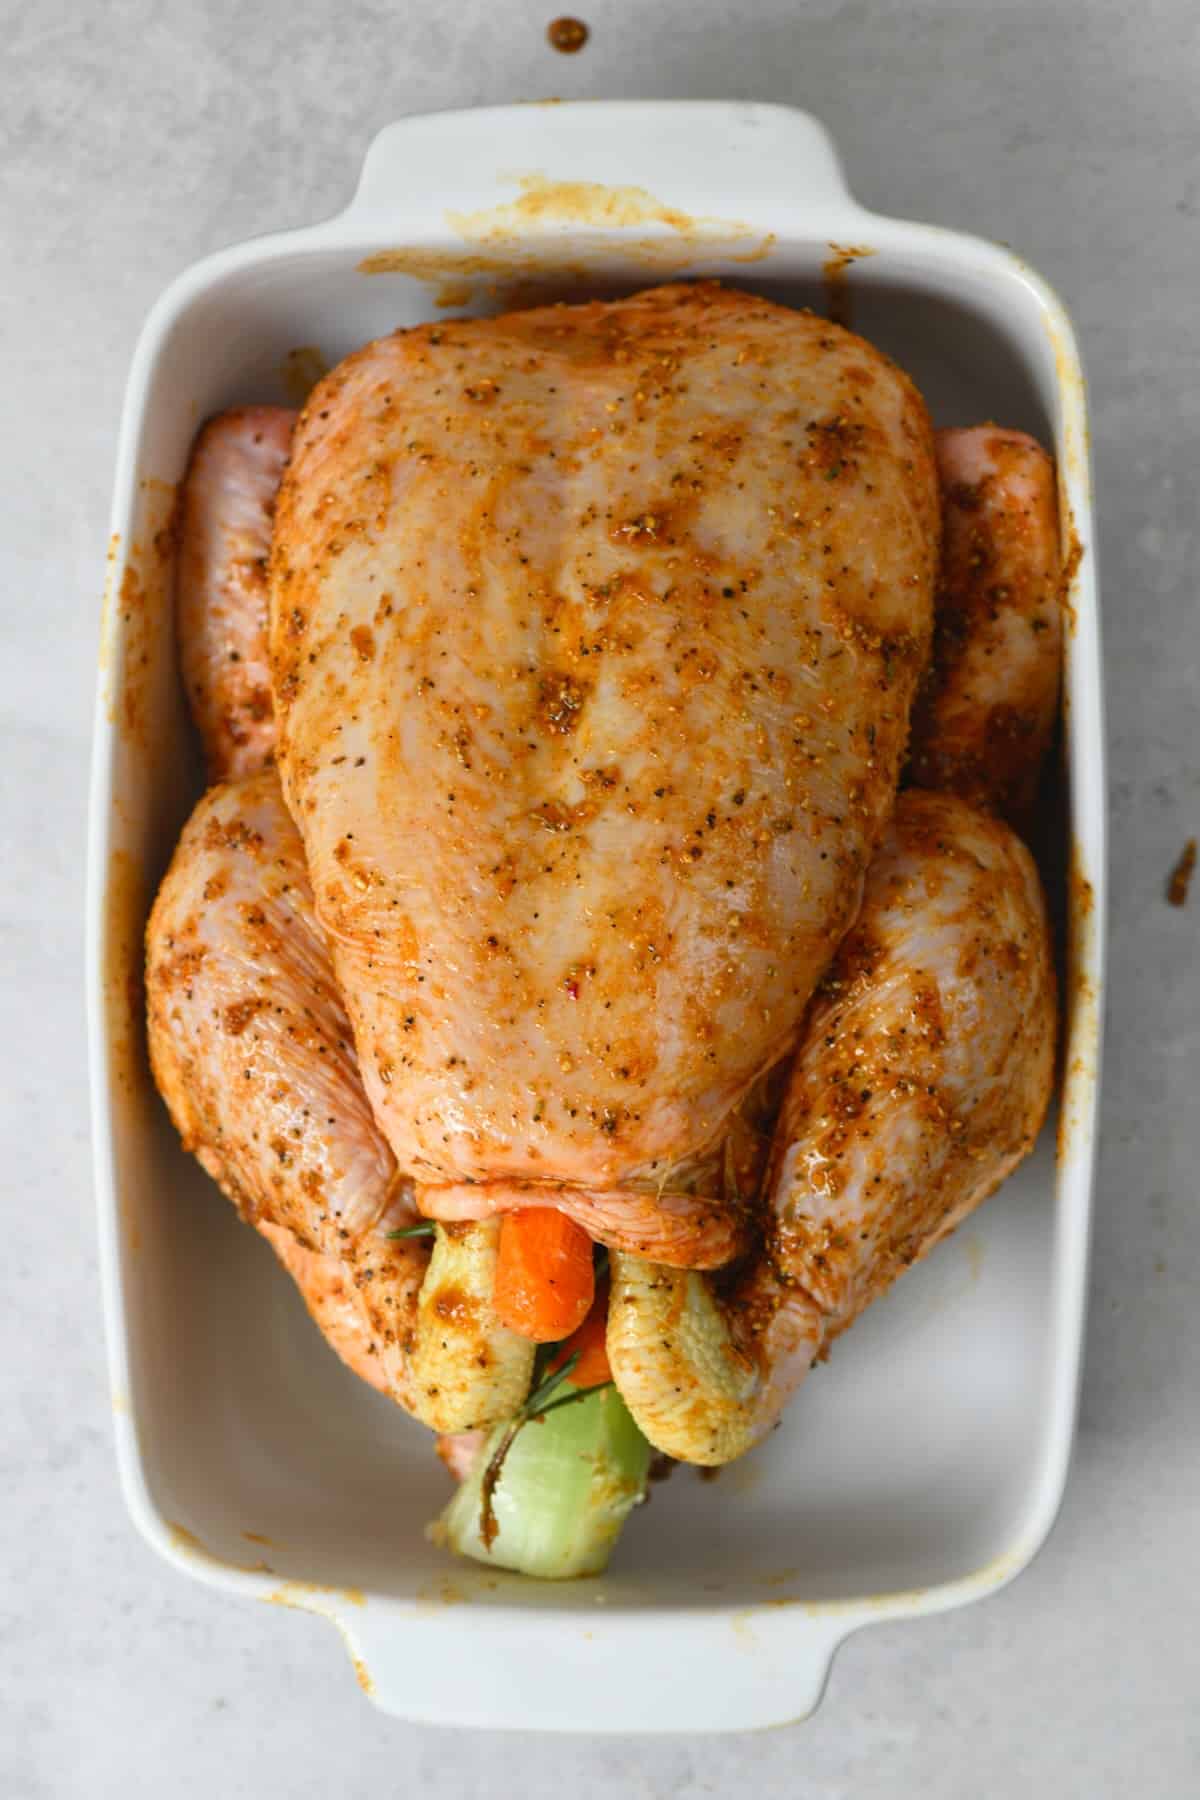 Whole chicken seasoned with spices